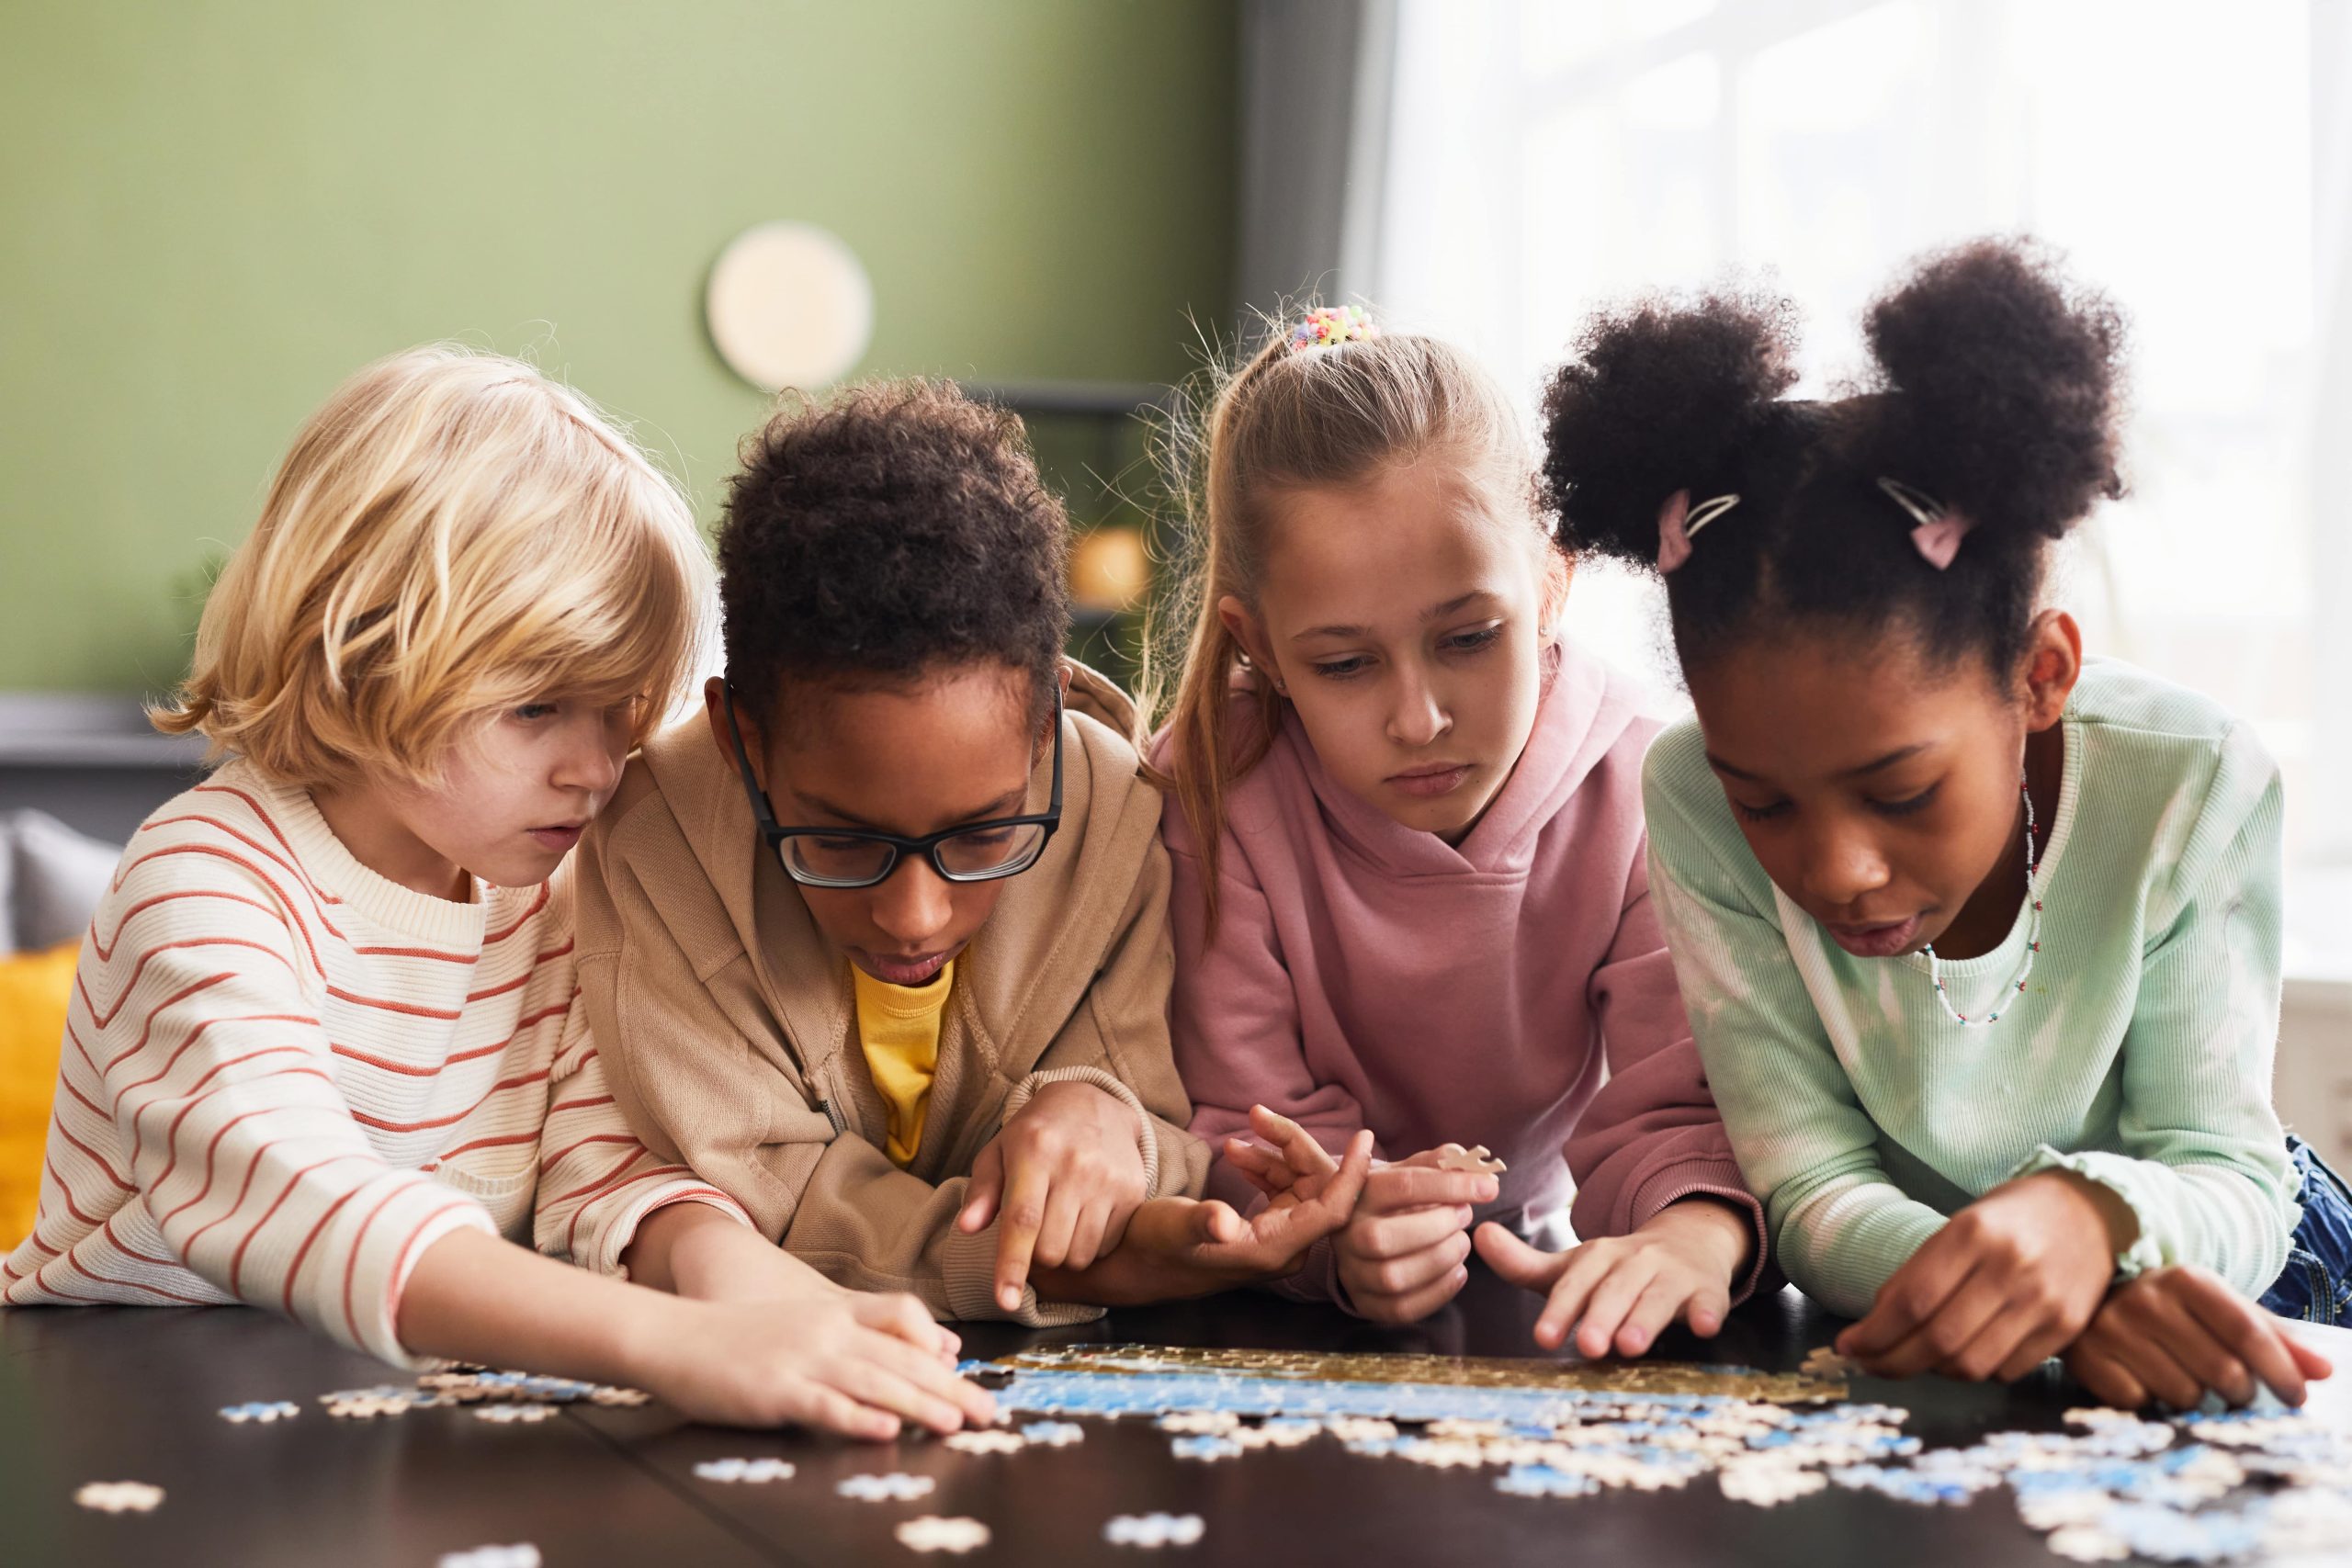 group-of-kids-playing-with-puzzle-2022-02-22-04-26-18-utc-min